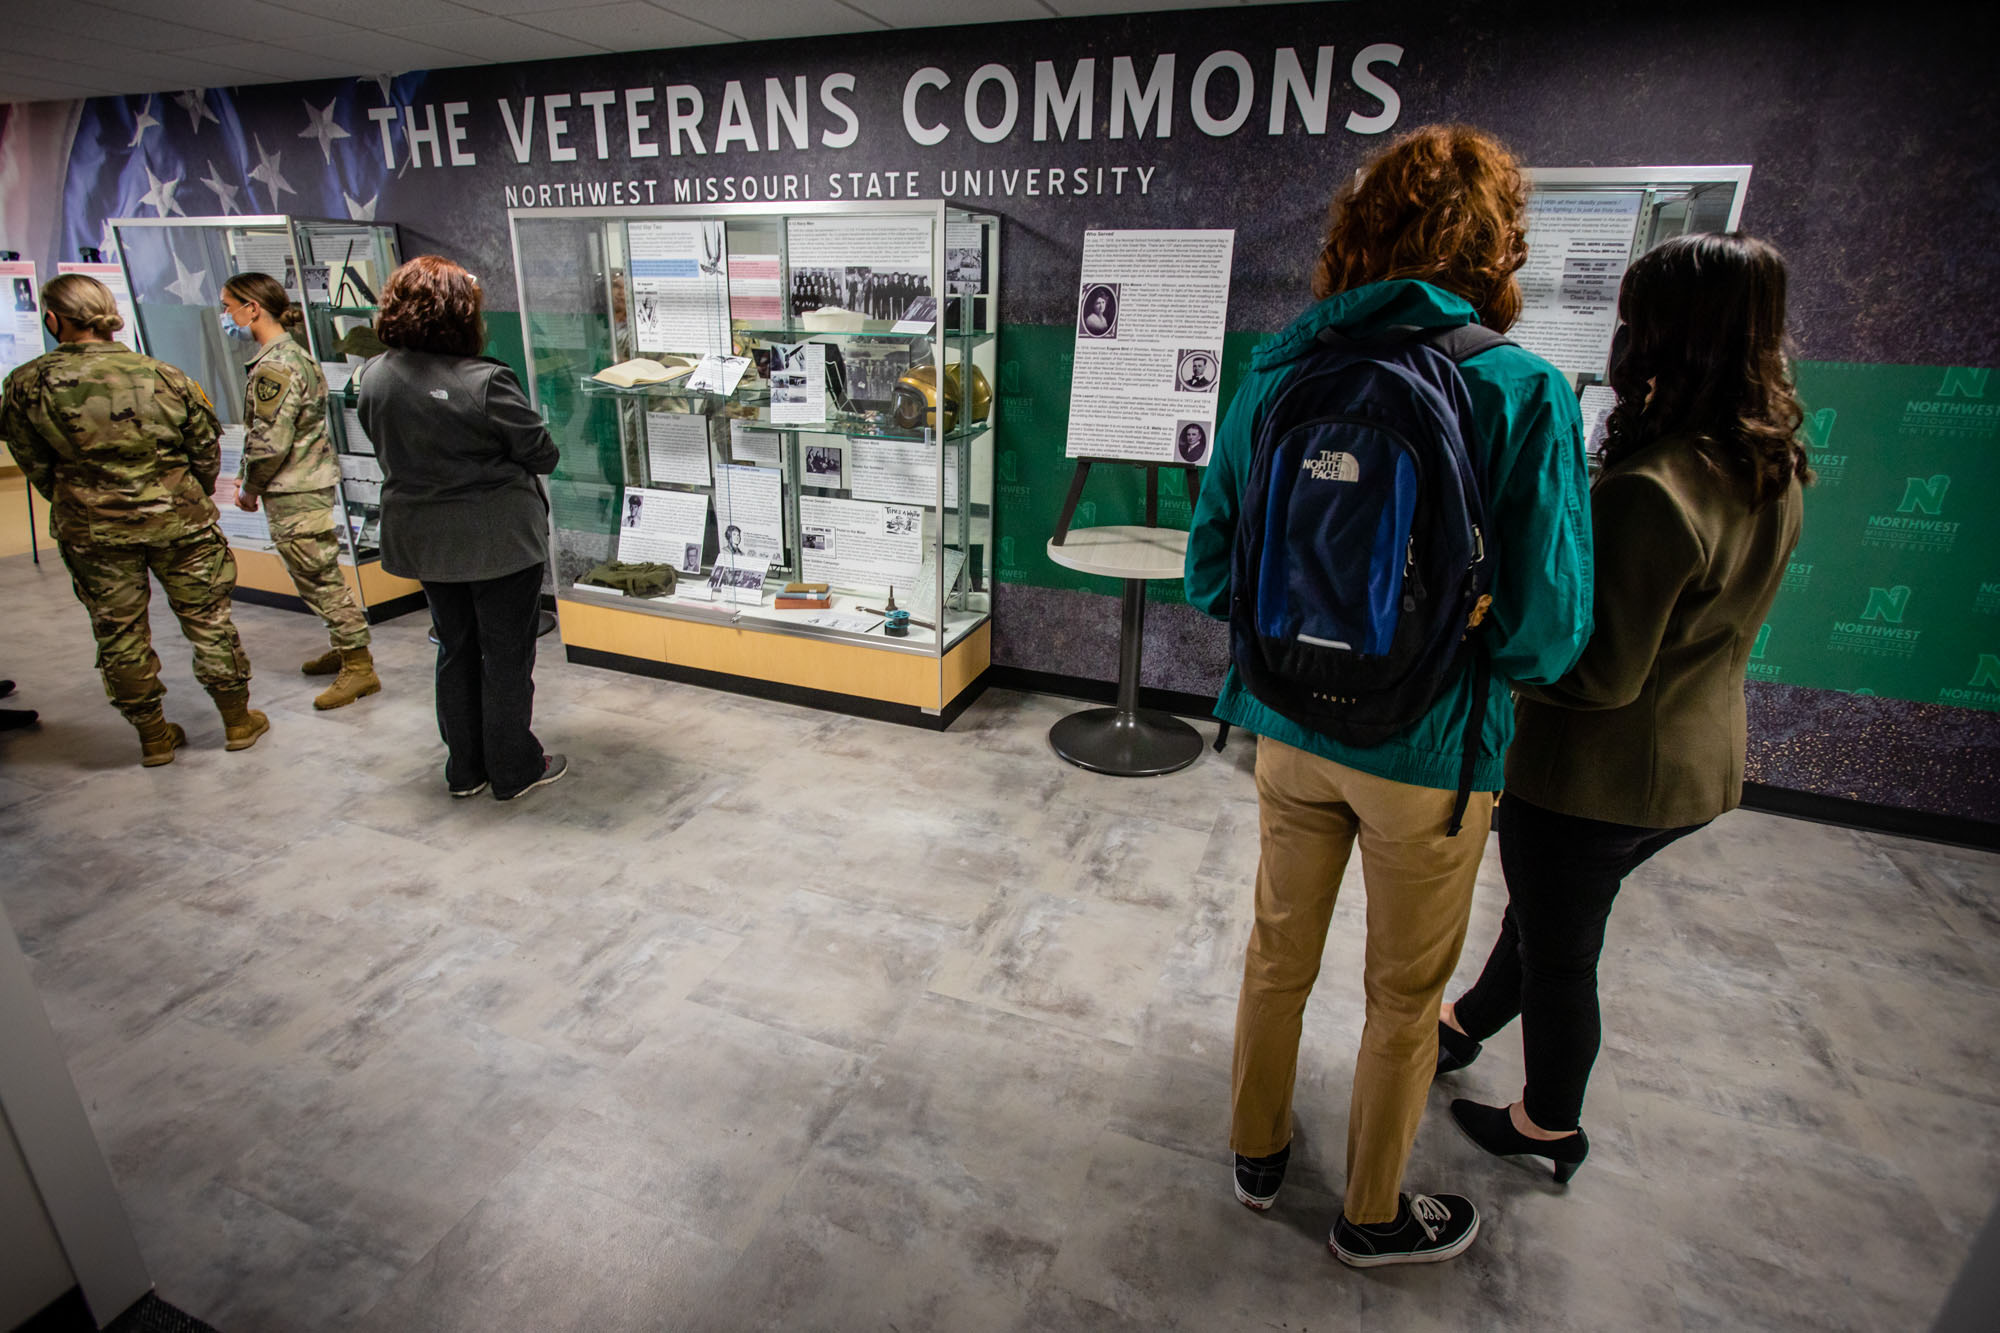 Veterans Commons features an exhibit developed by Northwest public history and museum studies students that details military experiences of students, faculty and staff as well as University activities during times of significant military conflict, including World War I, World War II, Korea and Vietnam.